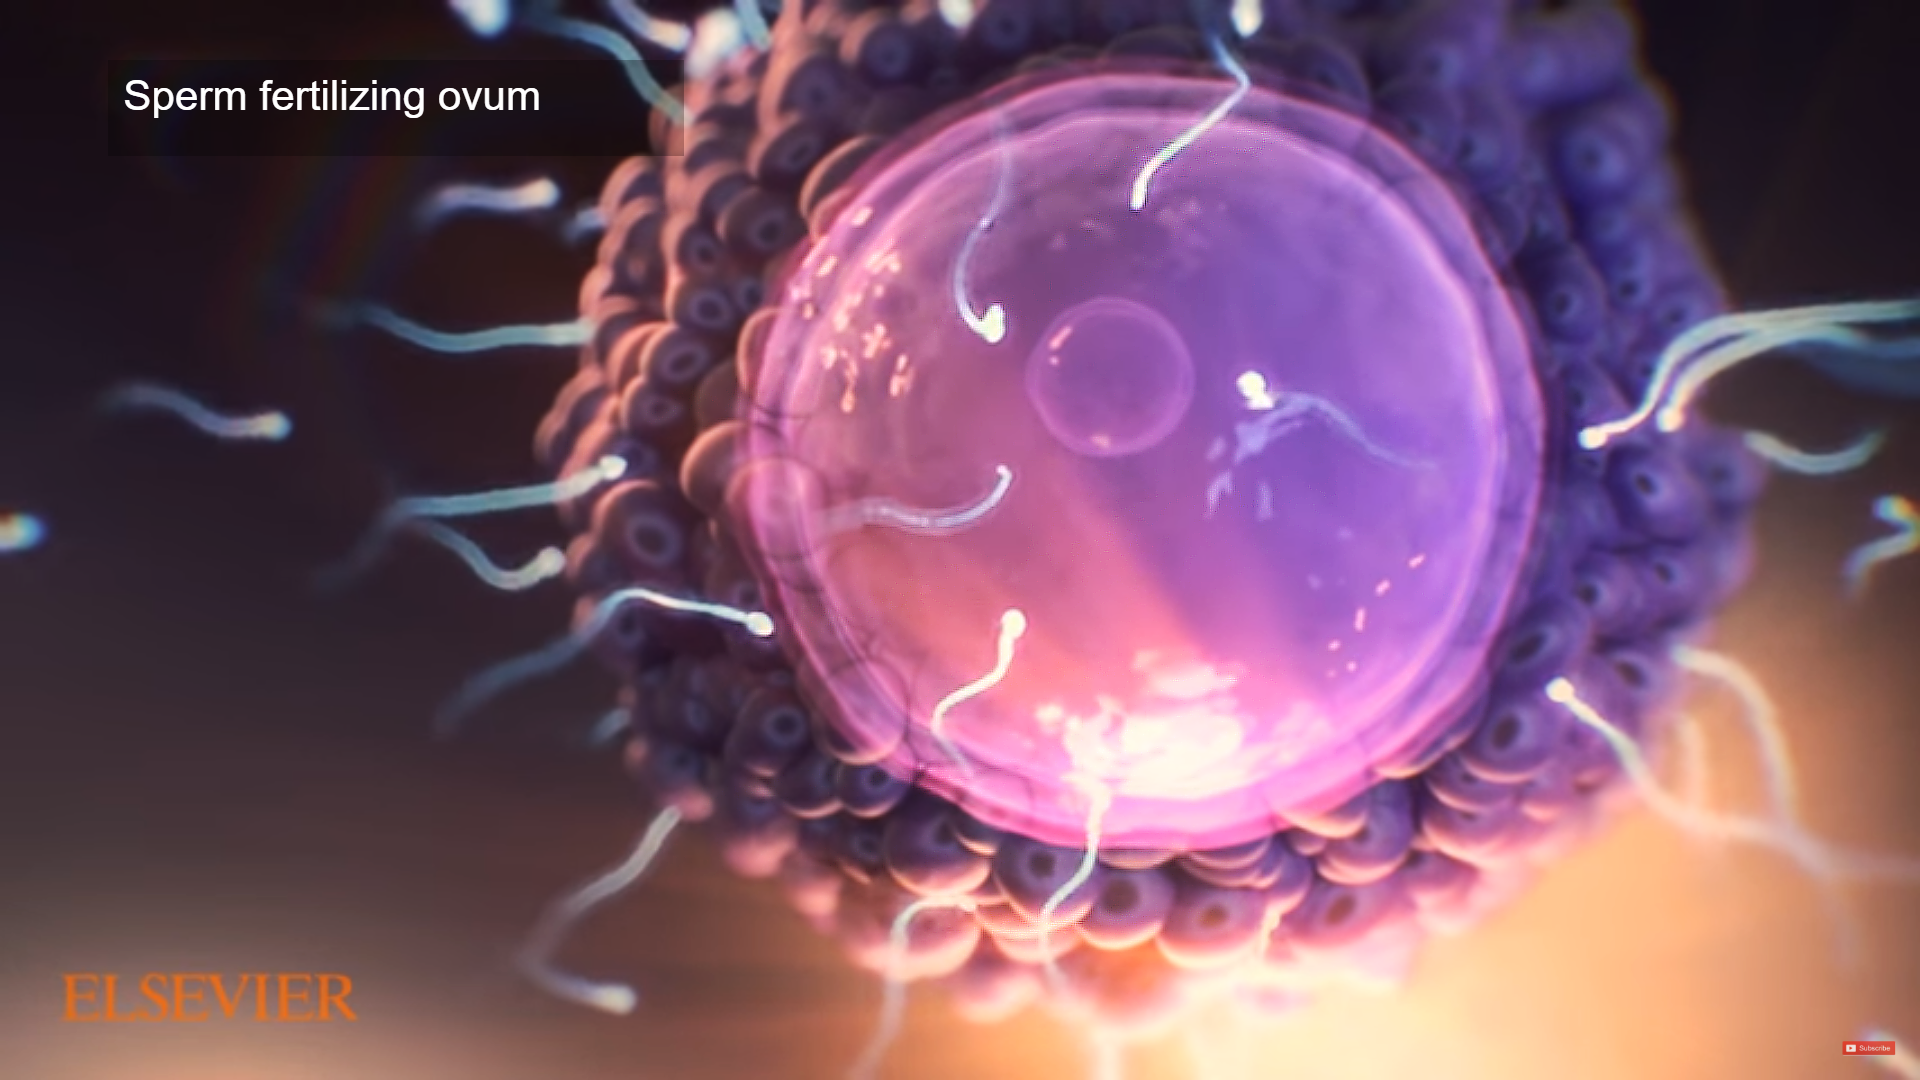 This image is a shot from one of Trinity's medical biological animation portraying a 3D model of sperm fertilizing the circular shaped ovum rendered from Trinity Animation's 3D software. This shot is a close-up view of the ovum displayed in vibrant purples and pinks with hyper realistic textures while sperm is entering it at many directions.